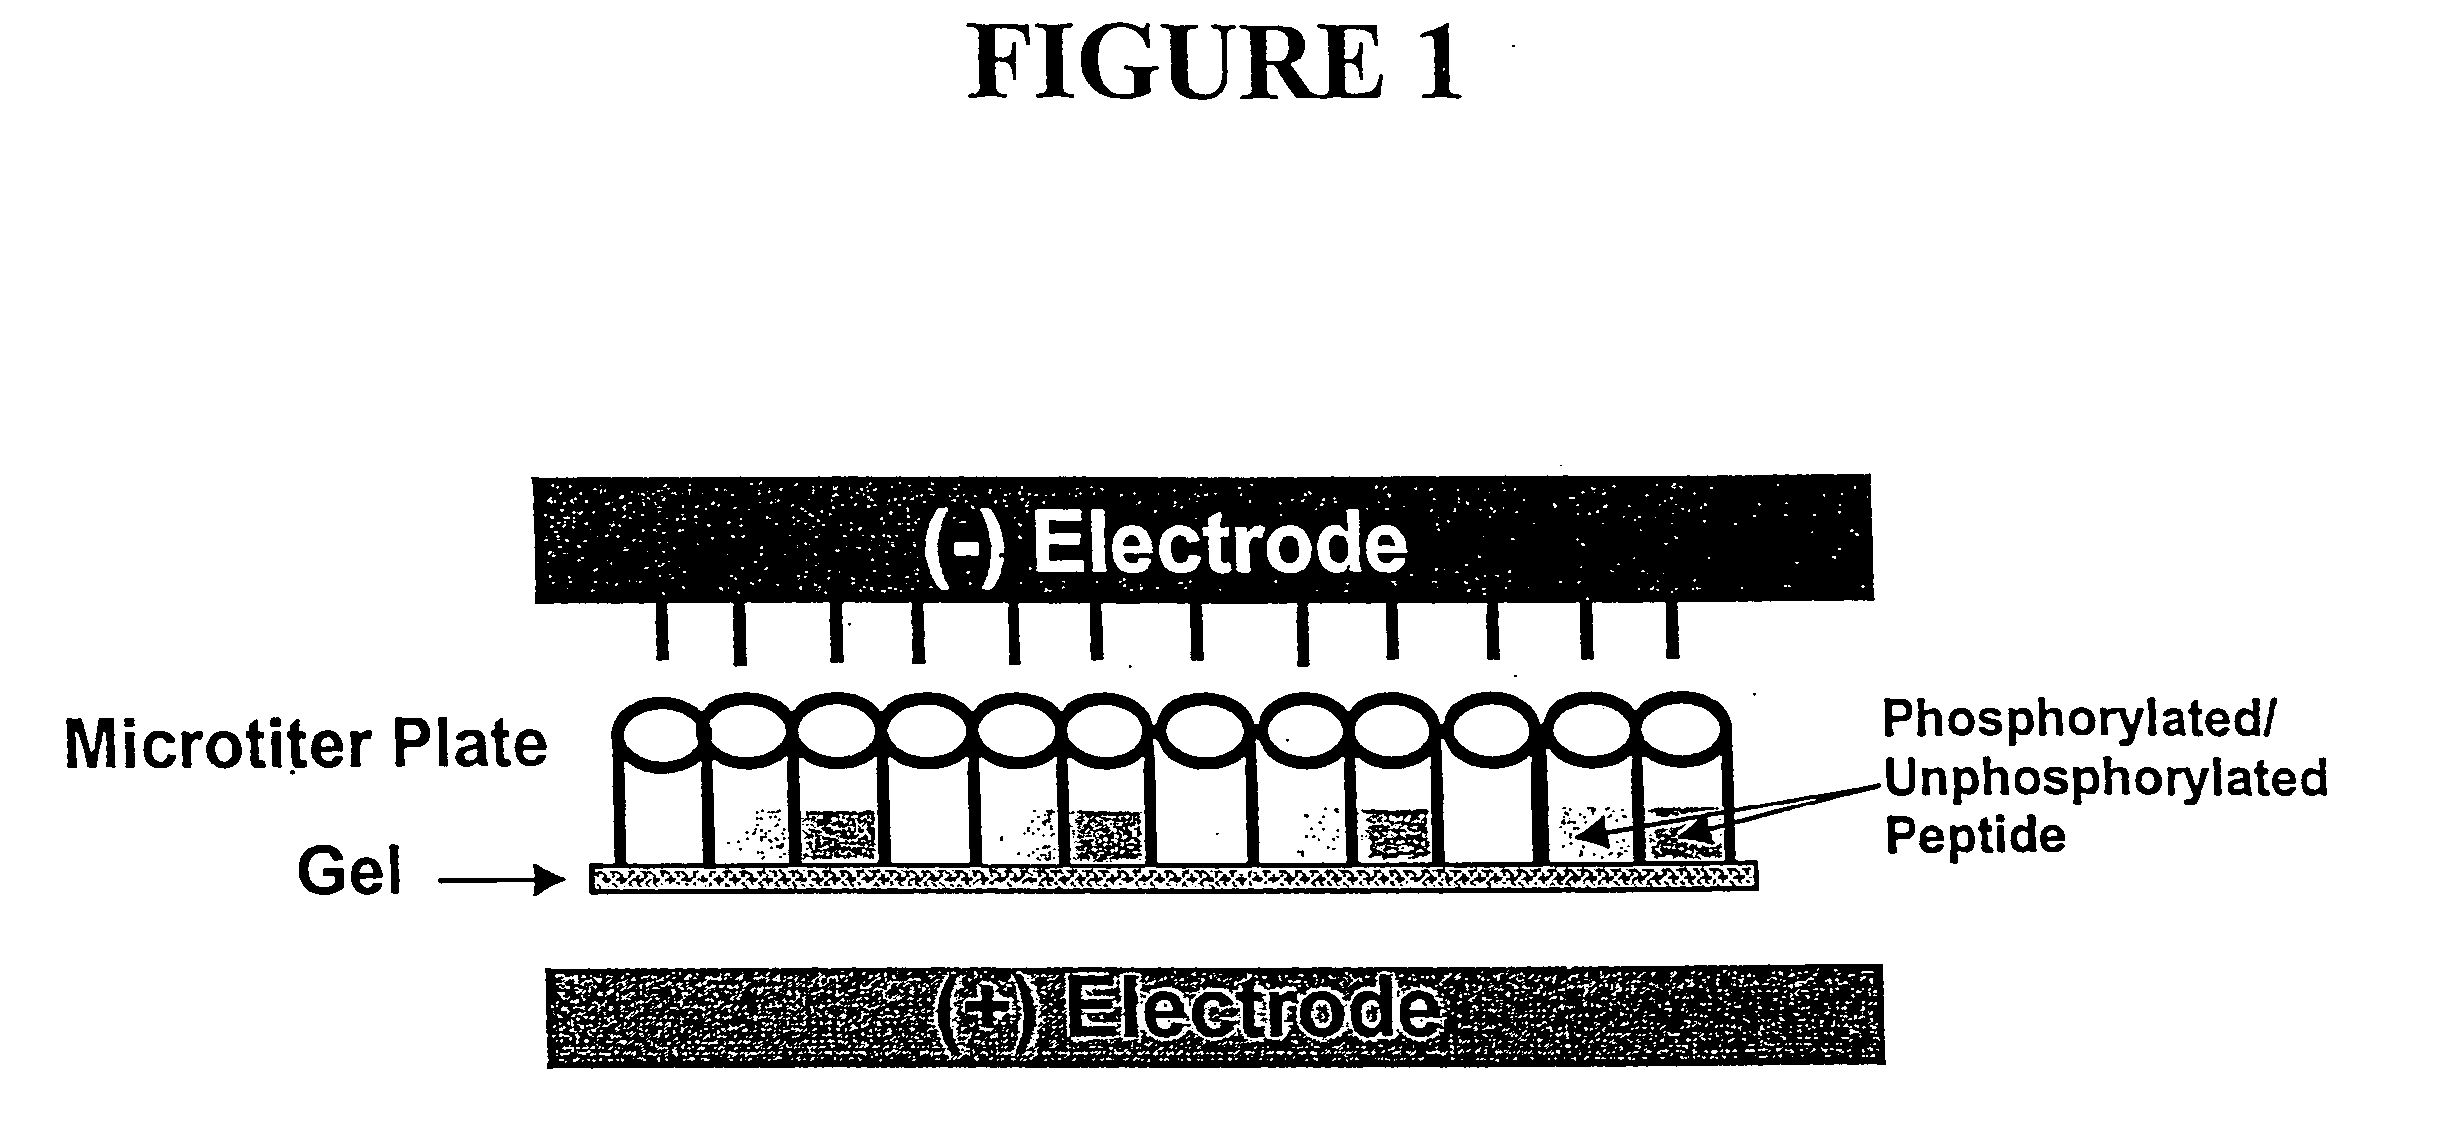 Microtiter plate format device and methods for separating differently charged molecules using an electric field